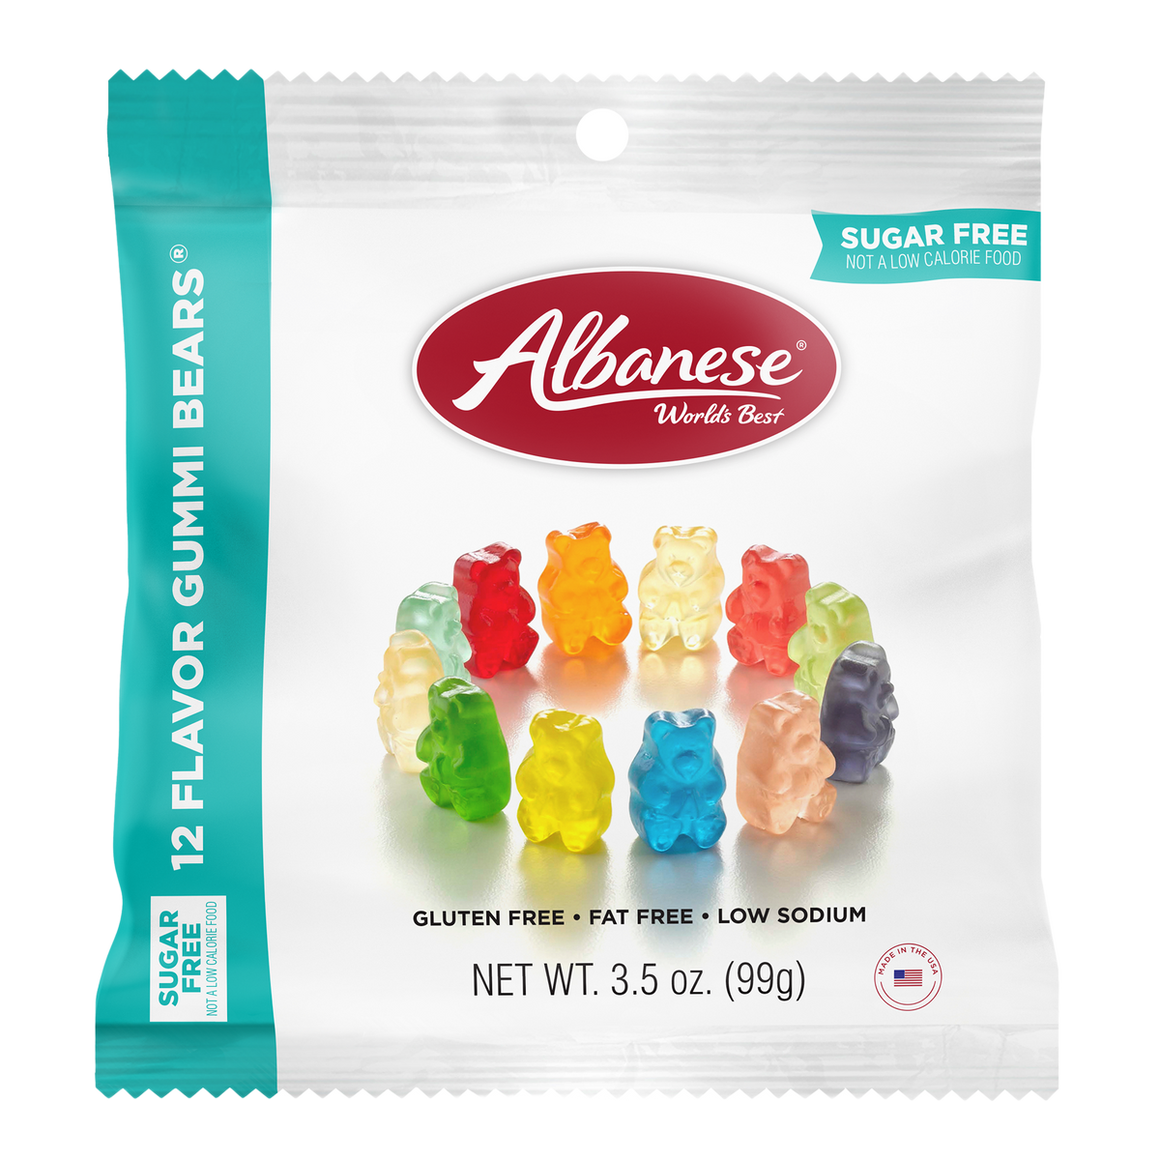 All City Candy Sugar Free 12 Flavor Gummi Bears 3.5-oz. Peg Bag Gummi Albanese Confectionery For fresh candy and great service, visit www.allcitycandy.com